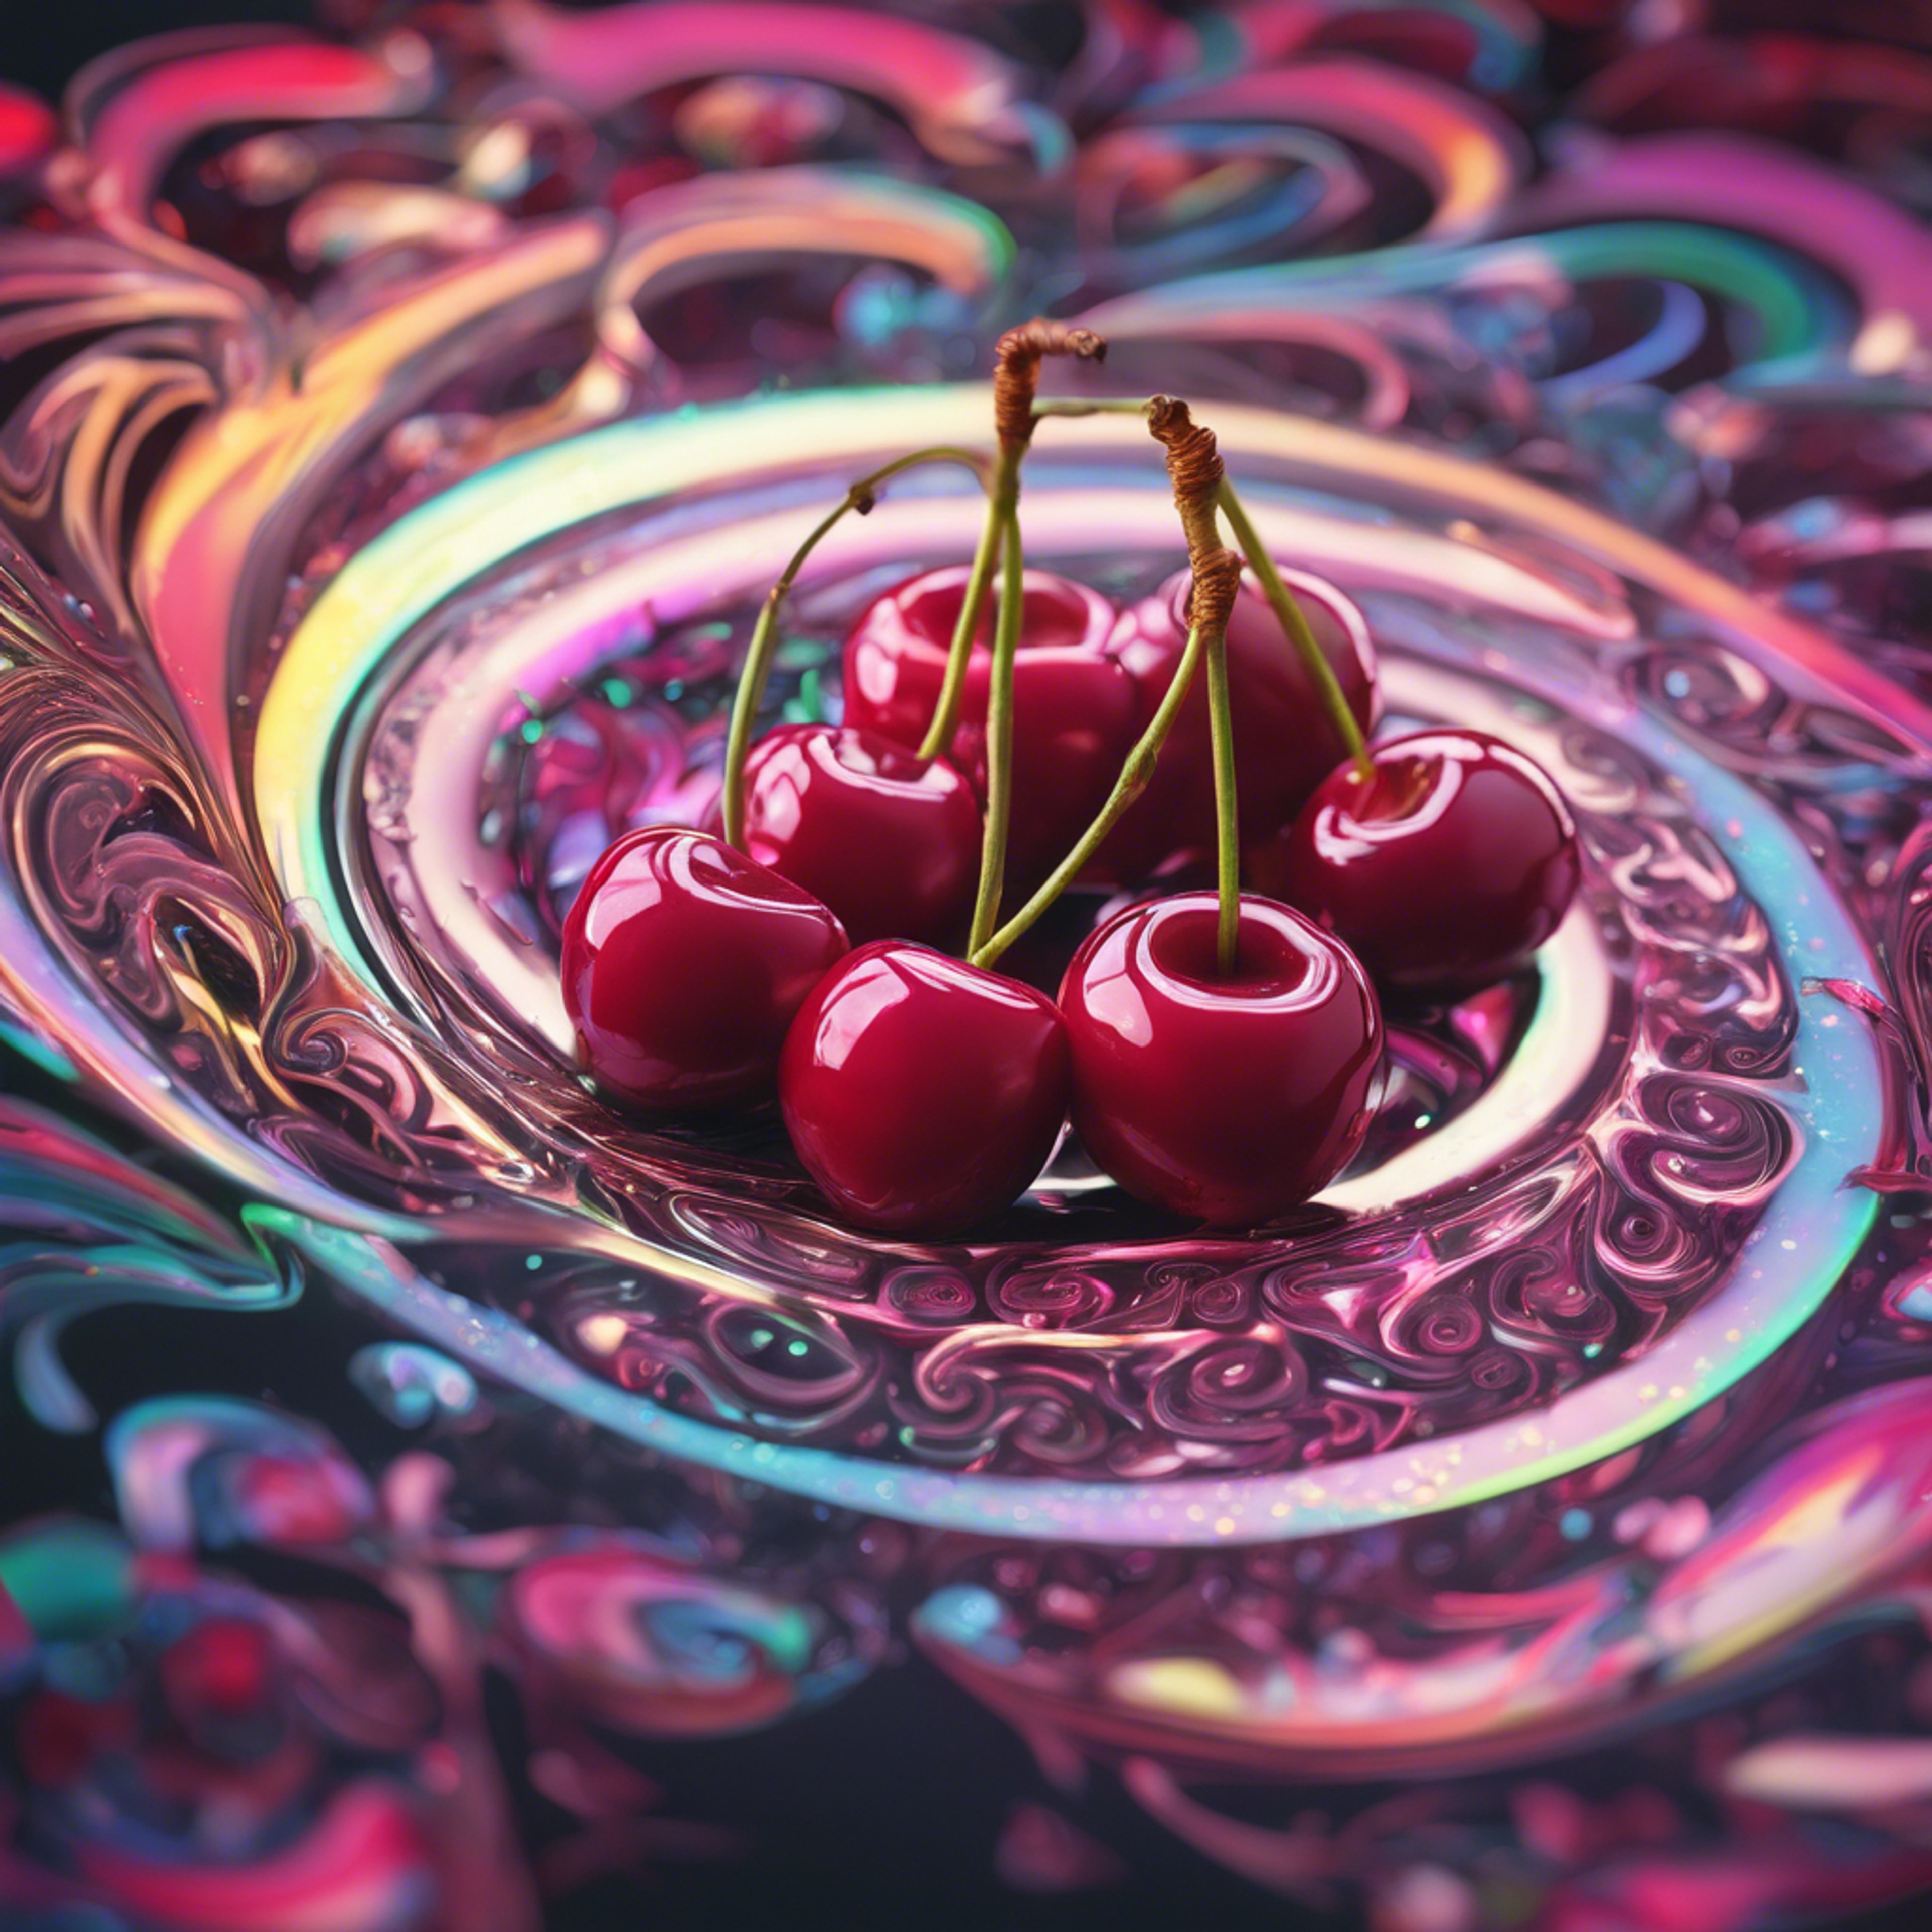 A psychedelic image of a cherry swirling into fractals.壁紙[9125d12b1a2f4c65a2b5]